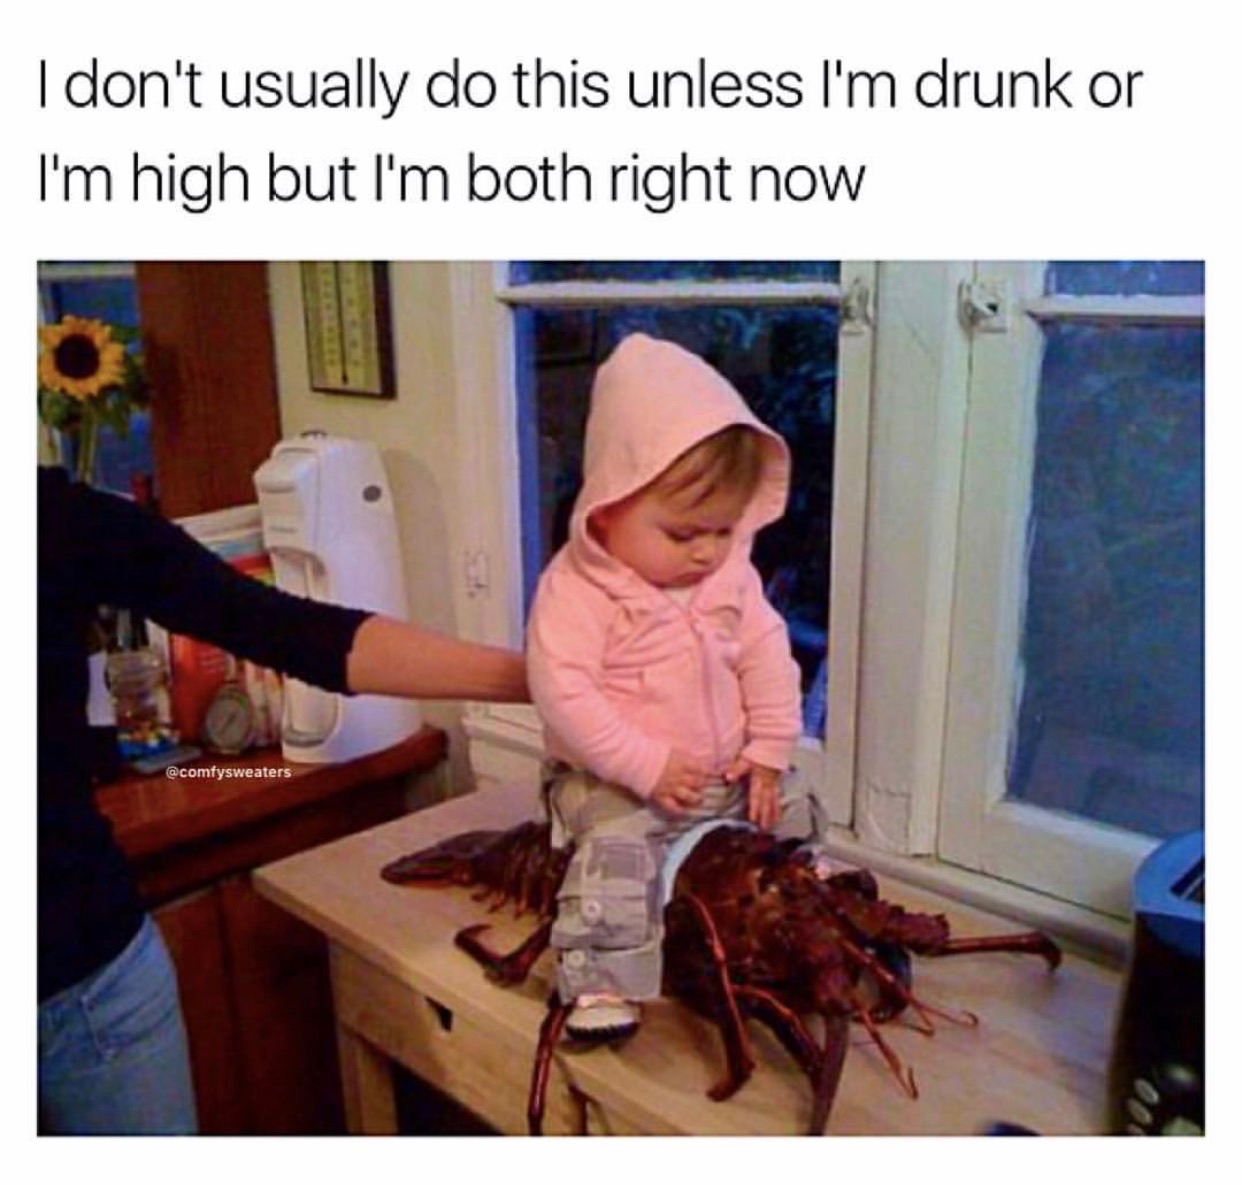 funny lobsters - I don't usually do this unless I'm drunk or I'm high but I'm both right now